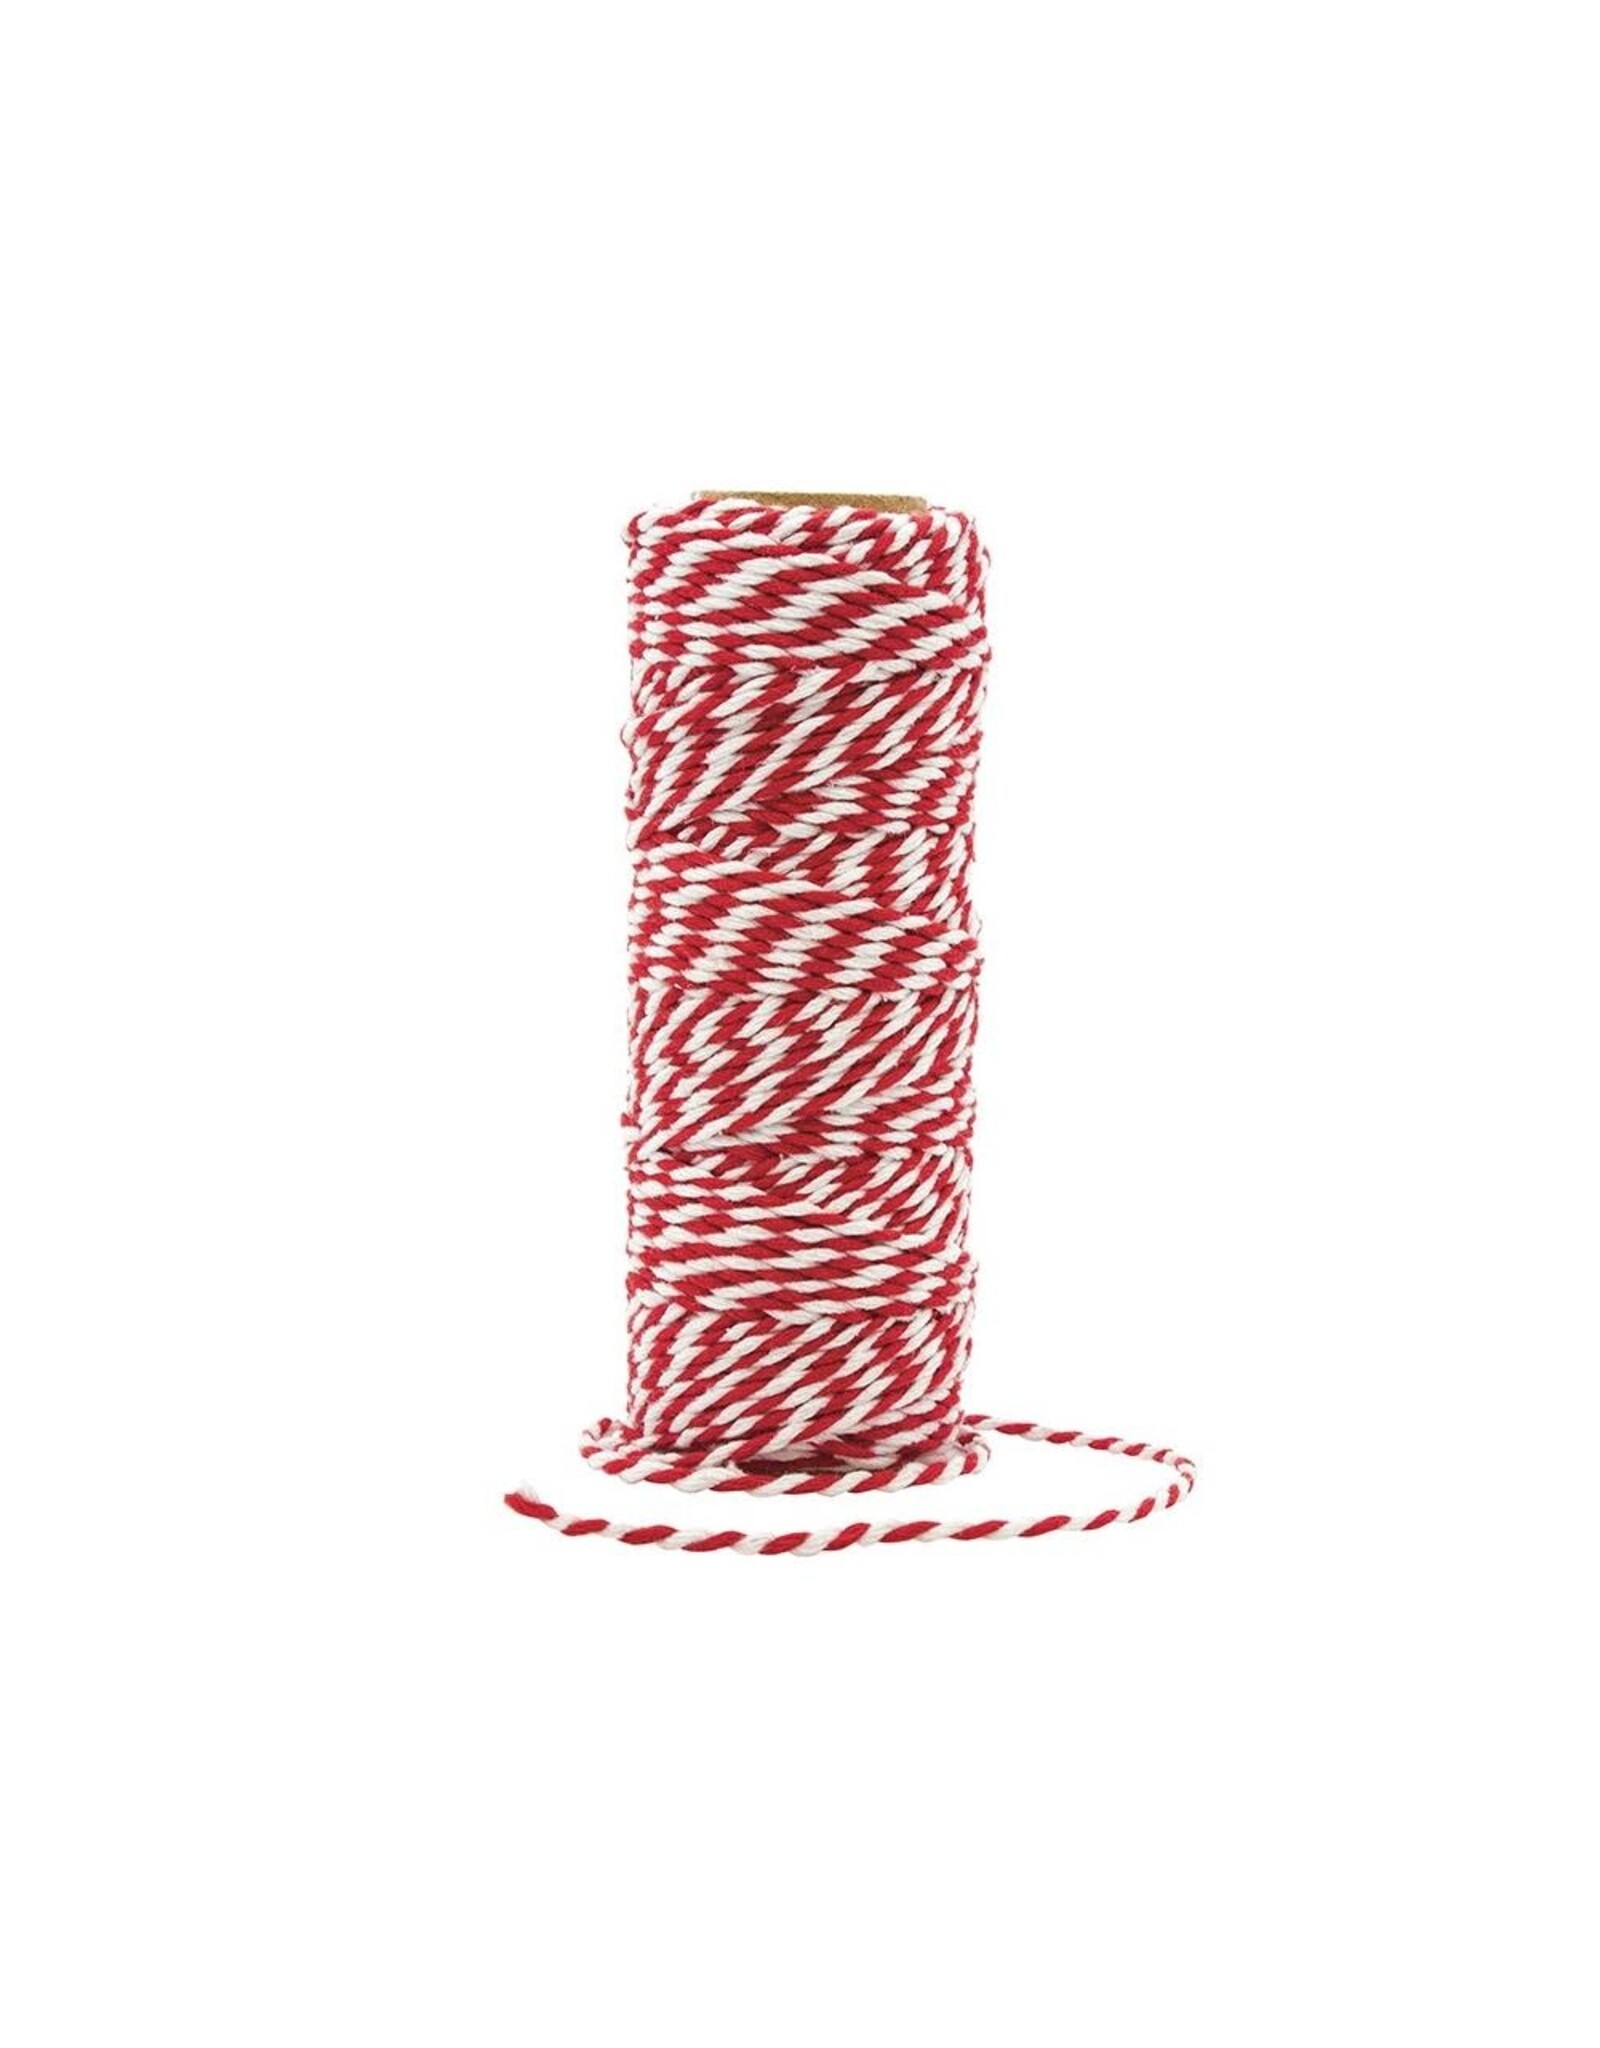 TONIC TONIC STUDIOS CRAFT PERFECT CHILLI RED BAKERS TWINE